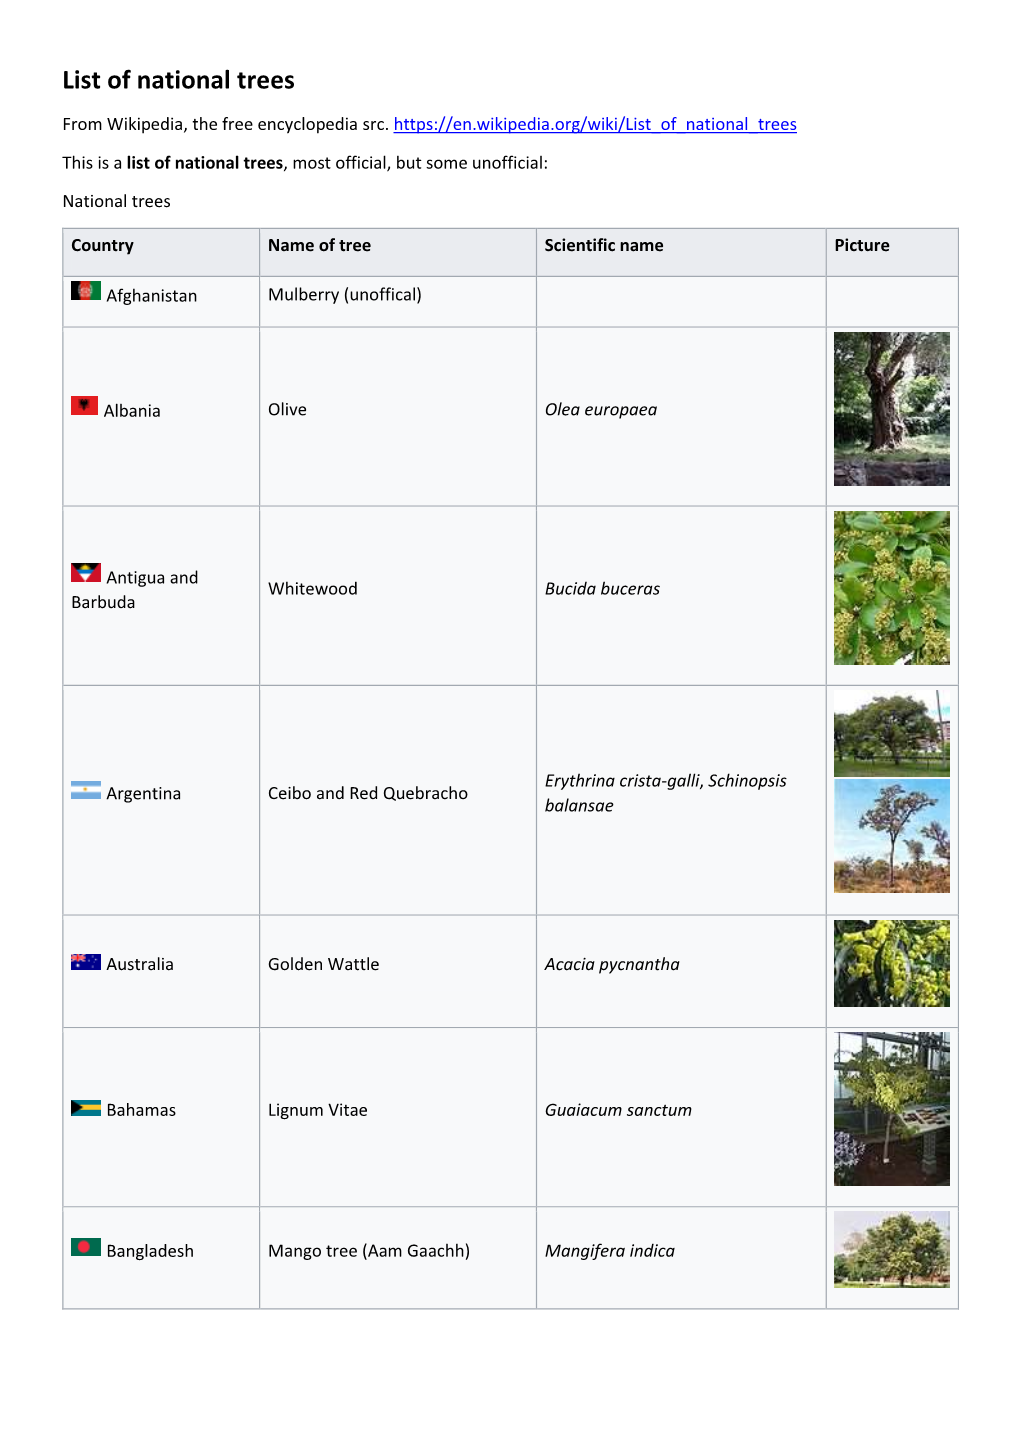 List of National Trees